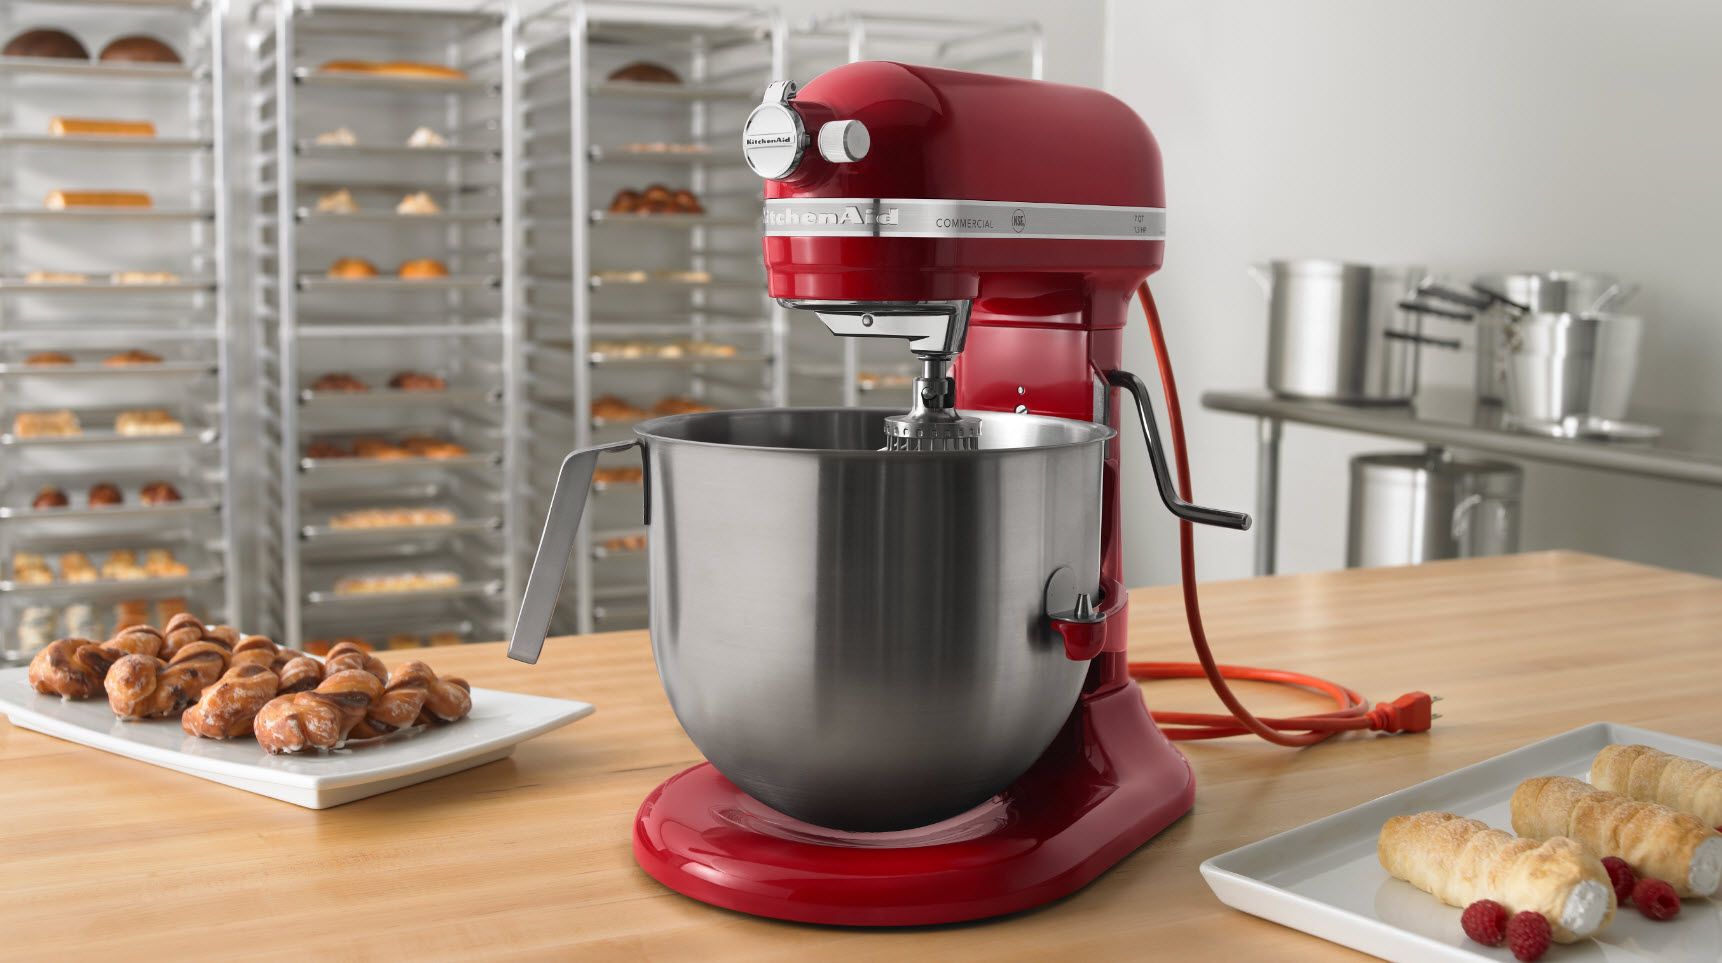 How To Use Kitchenaid Stand Mixer Bowl Lift